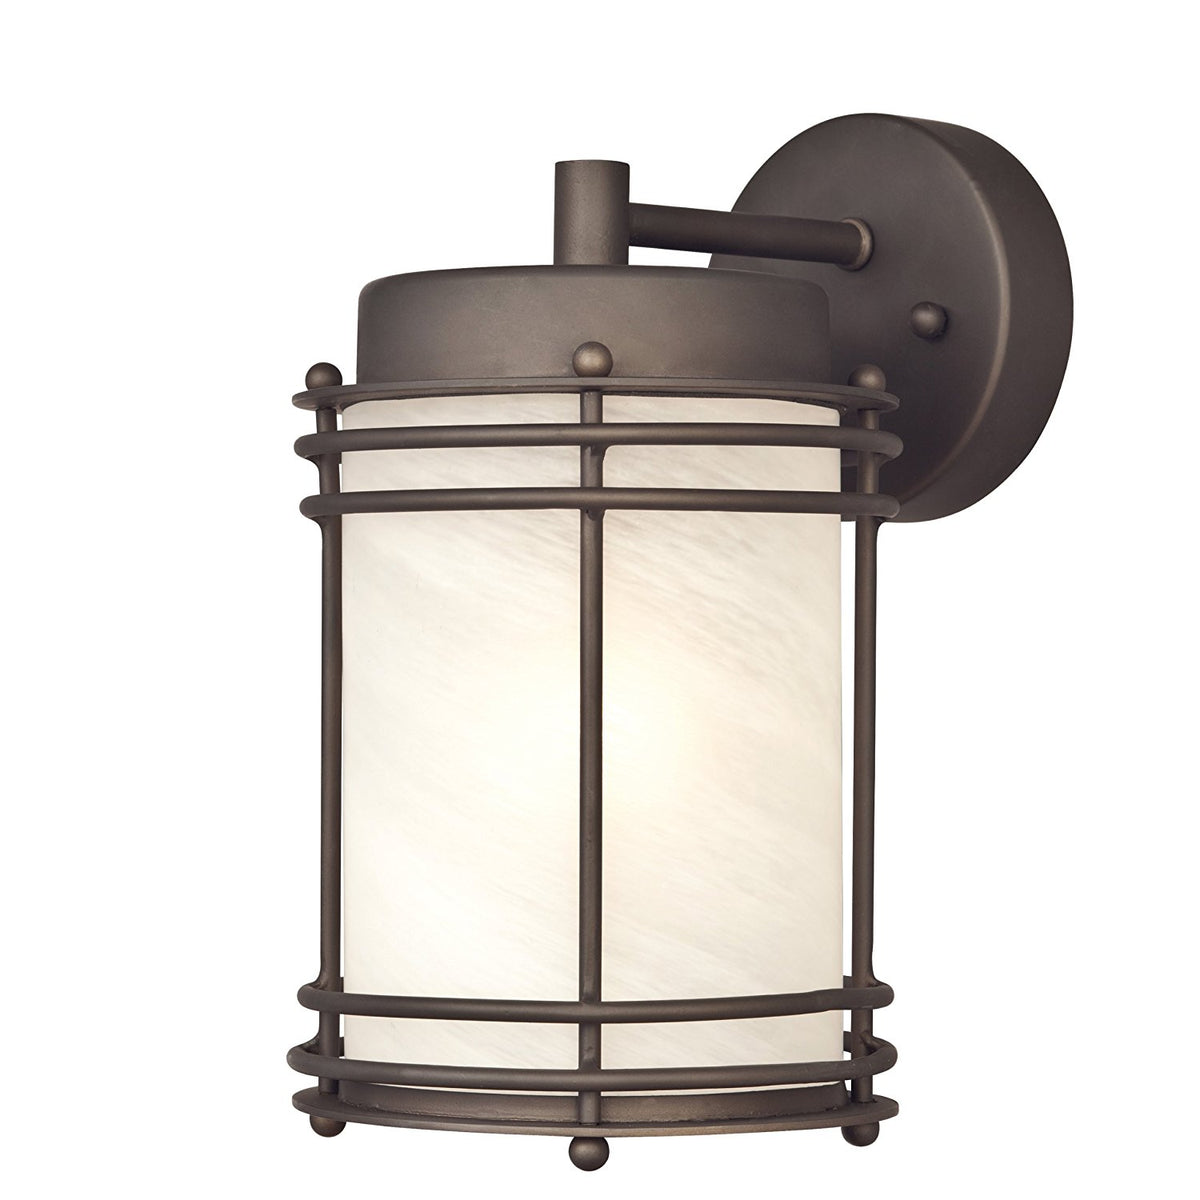 Westinghouse 62307 Parksville 1-Light Exterior Wall Lantern, Oil Rubbed Bronze